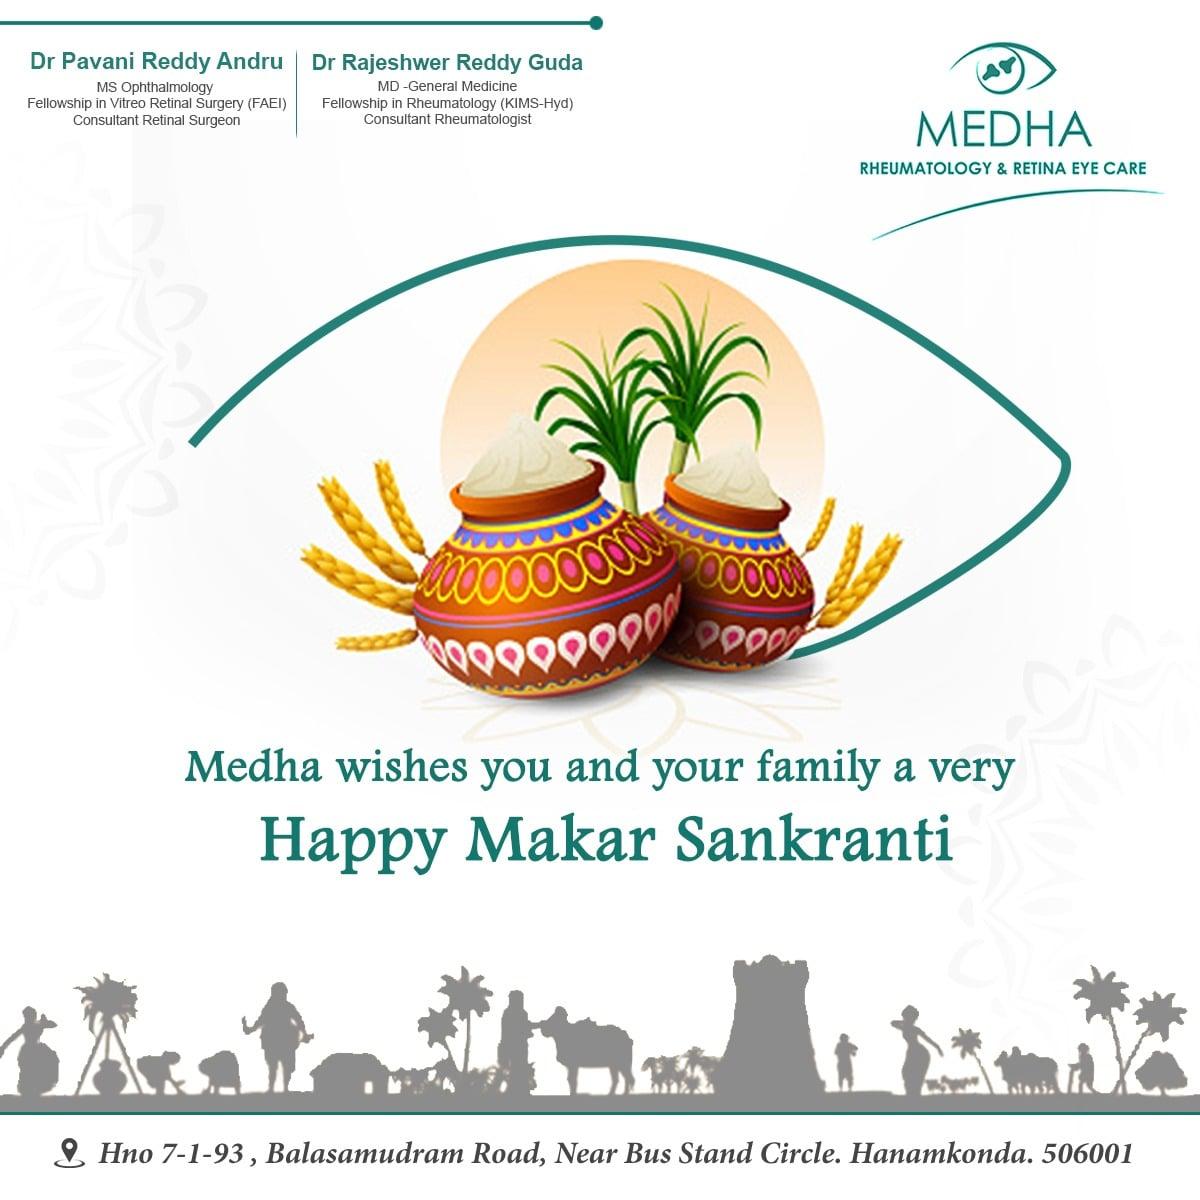 Medha Wishes you and your family a very Happy Makar Sankranti